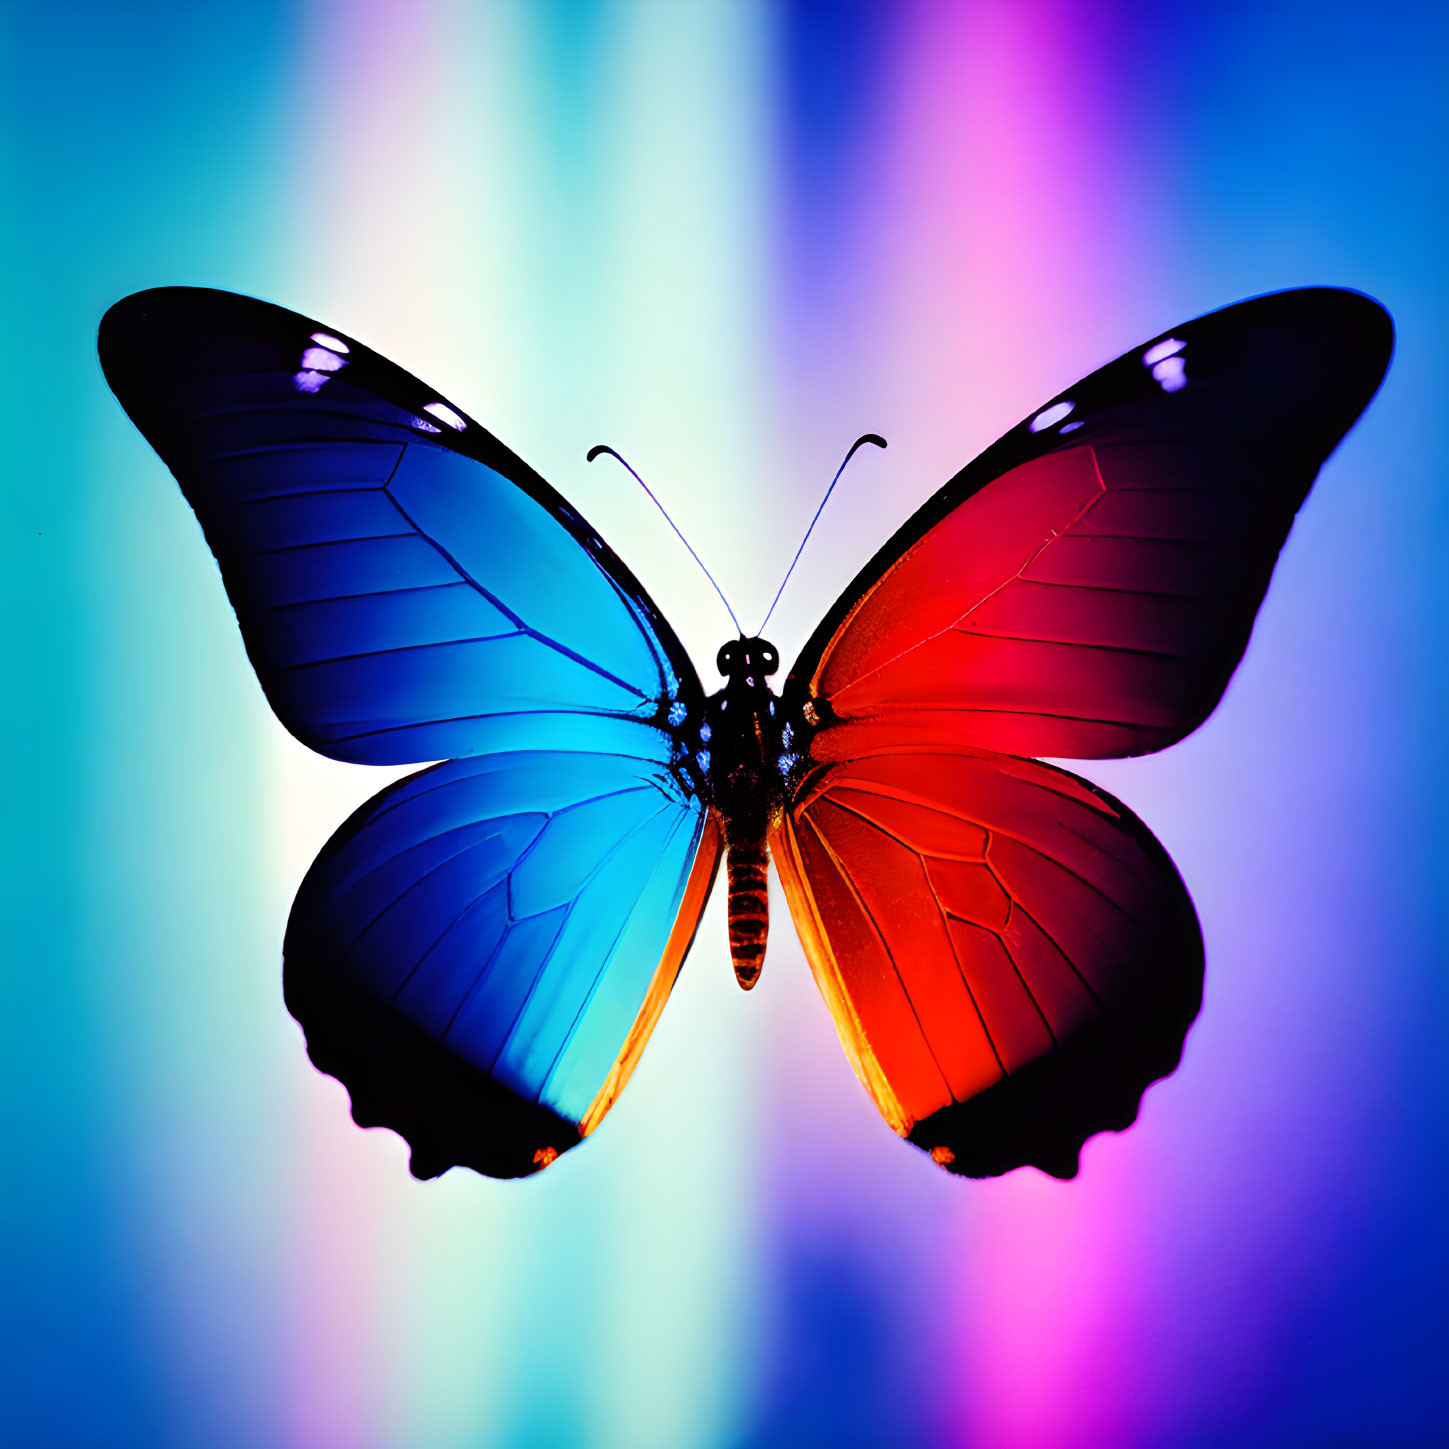 Colorful Butterfly with Blue and Red Wings on Blurred Background